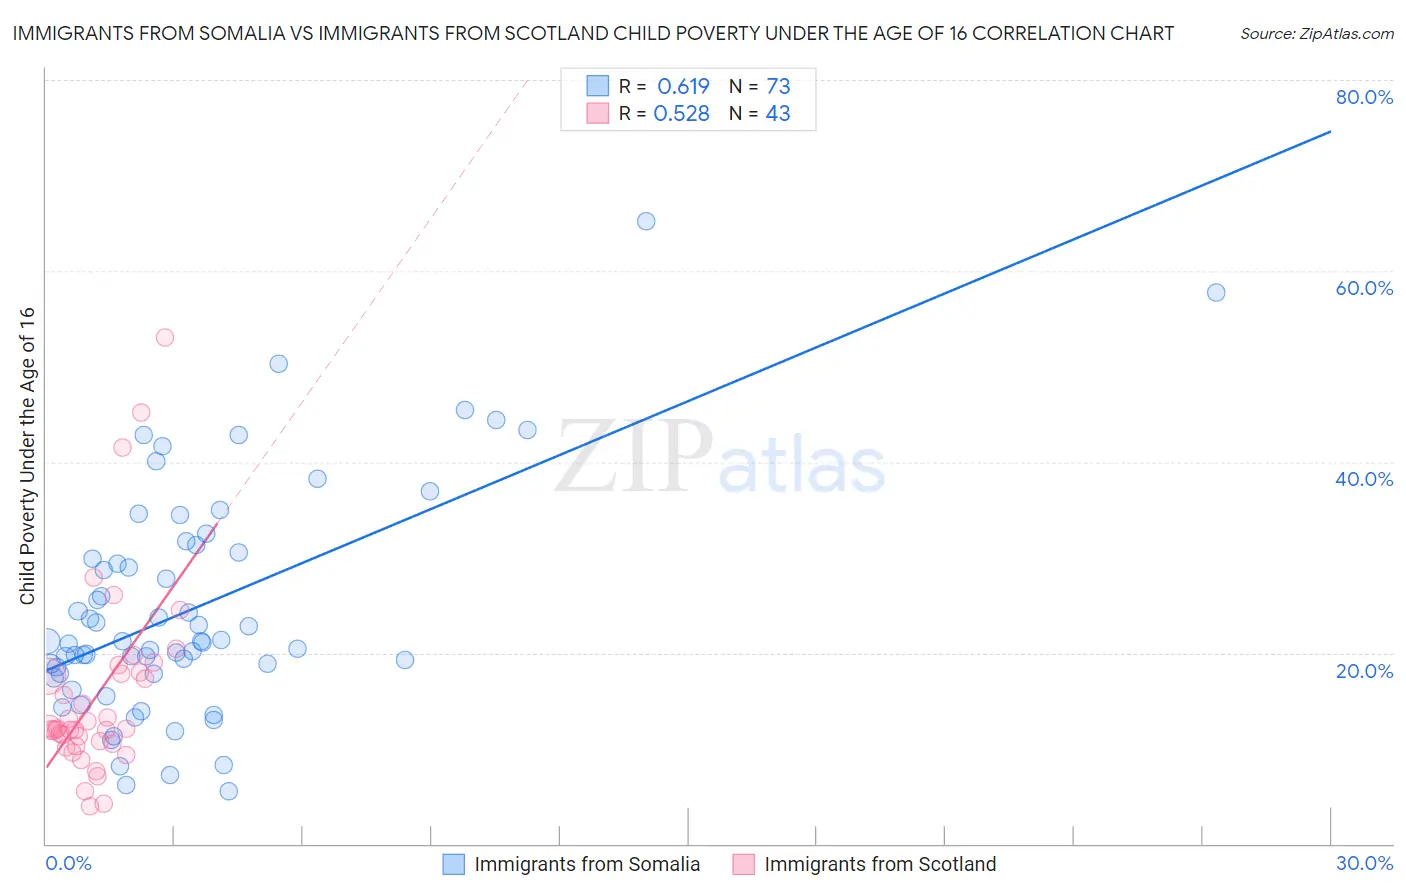 Immigrants from Somalia vs Immigrants from Scotland Child Poverty Under the Age of 16